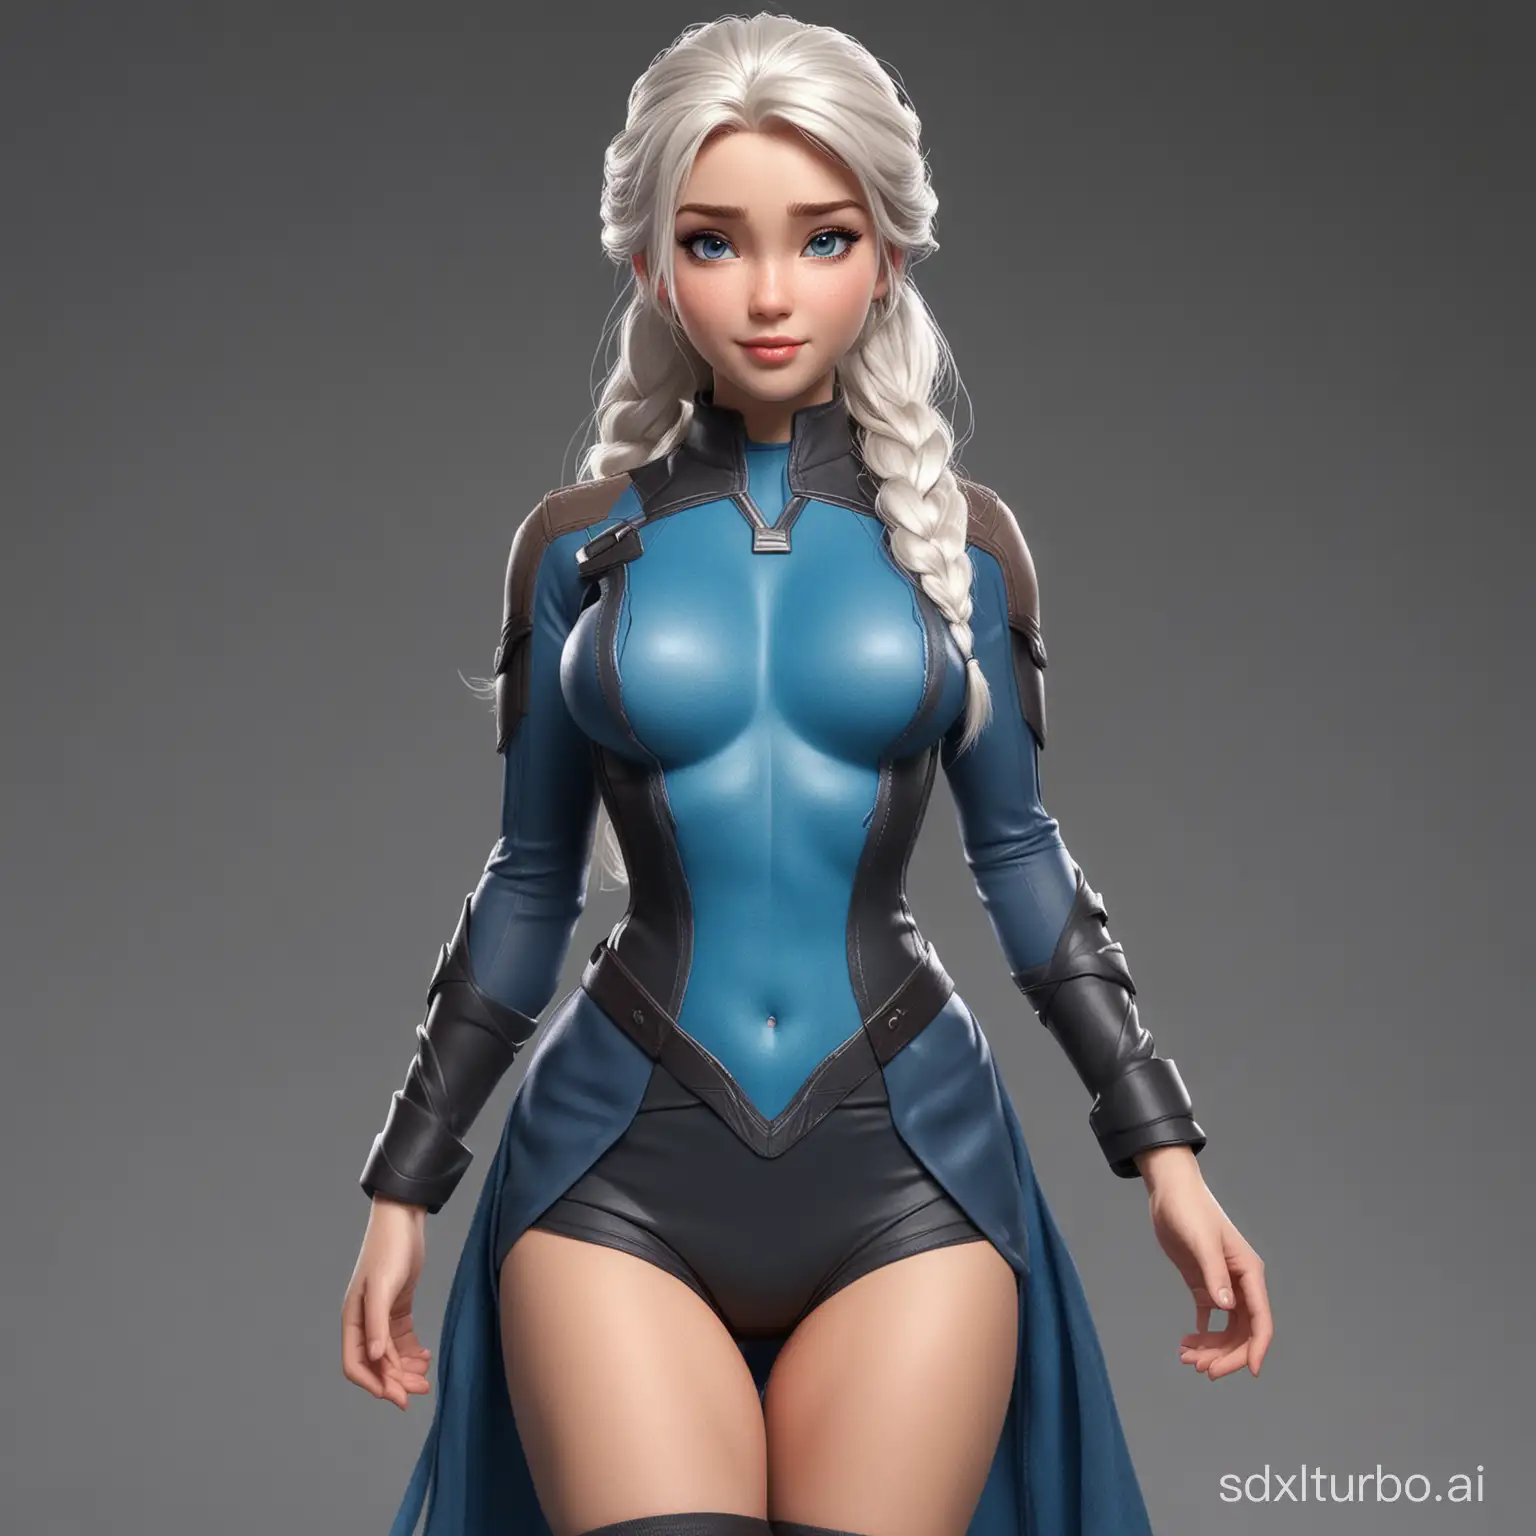       
realistic Elsa and rougue mix (full body) with big thick fit body, small shoulders, big ass, freckleless with white hair, sexy lips, x men uniform, nice 
 hips,